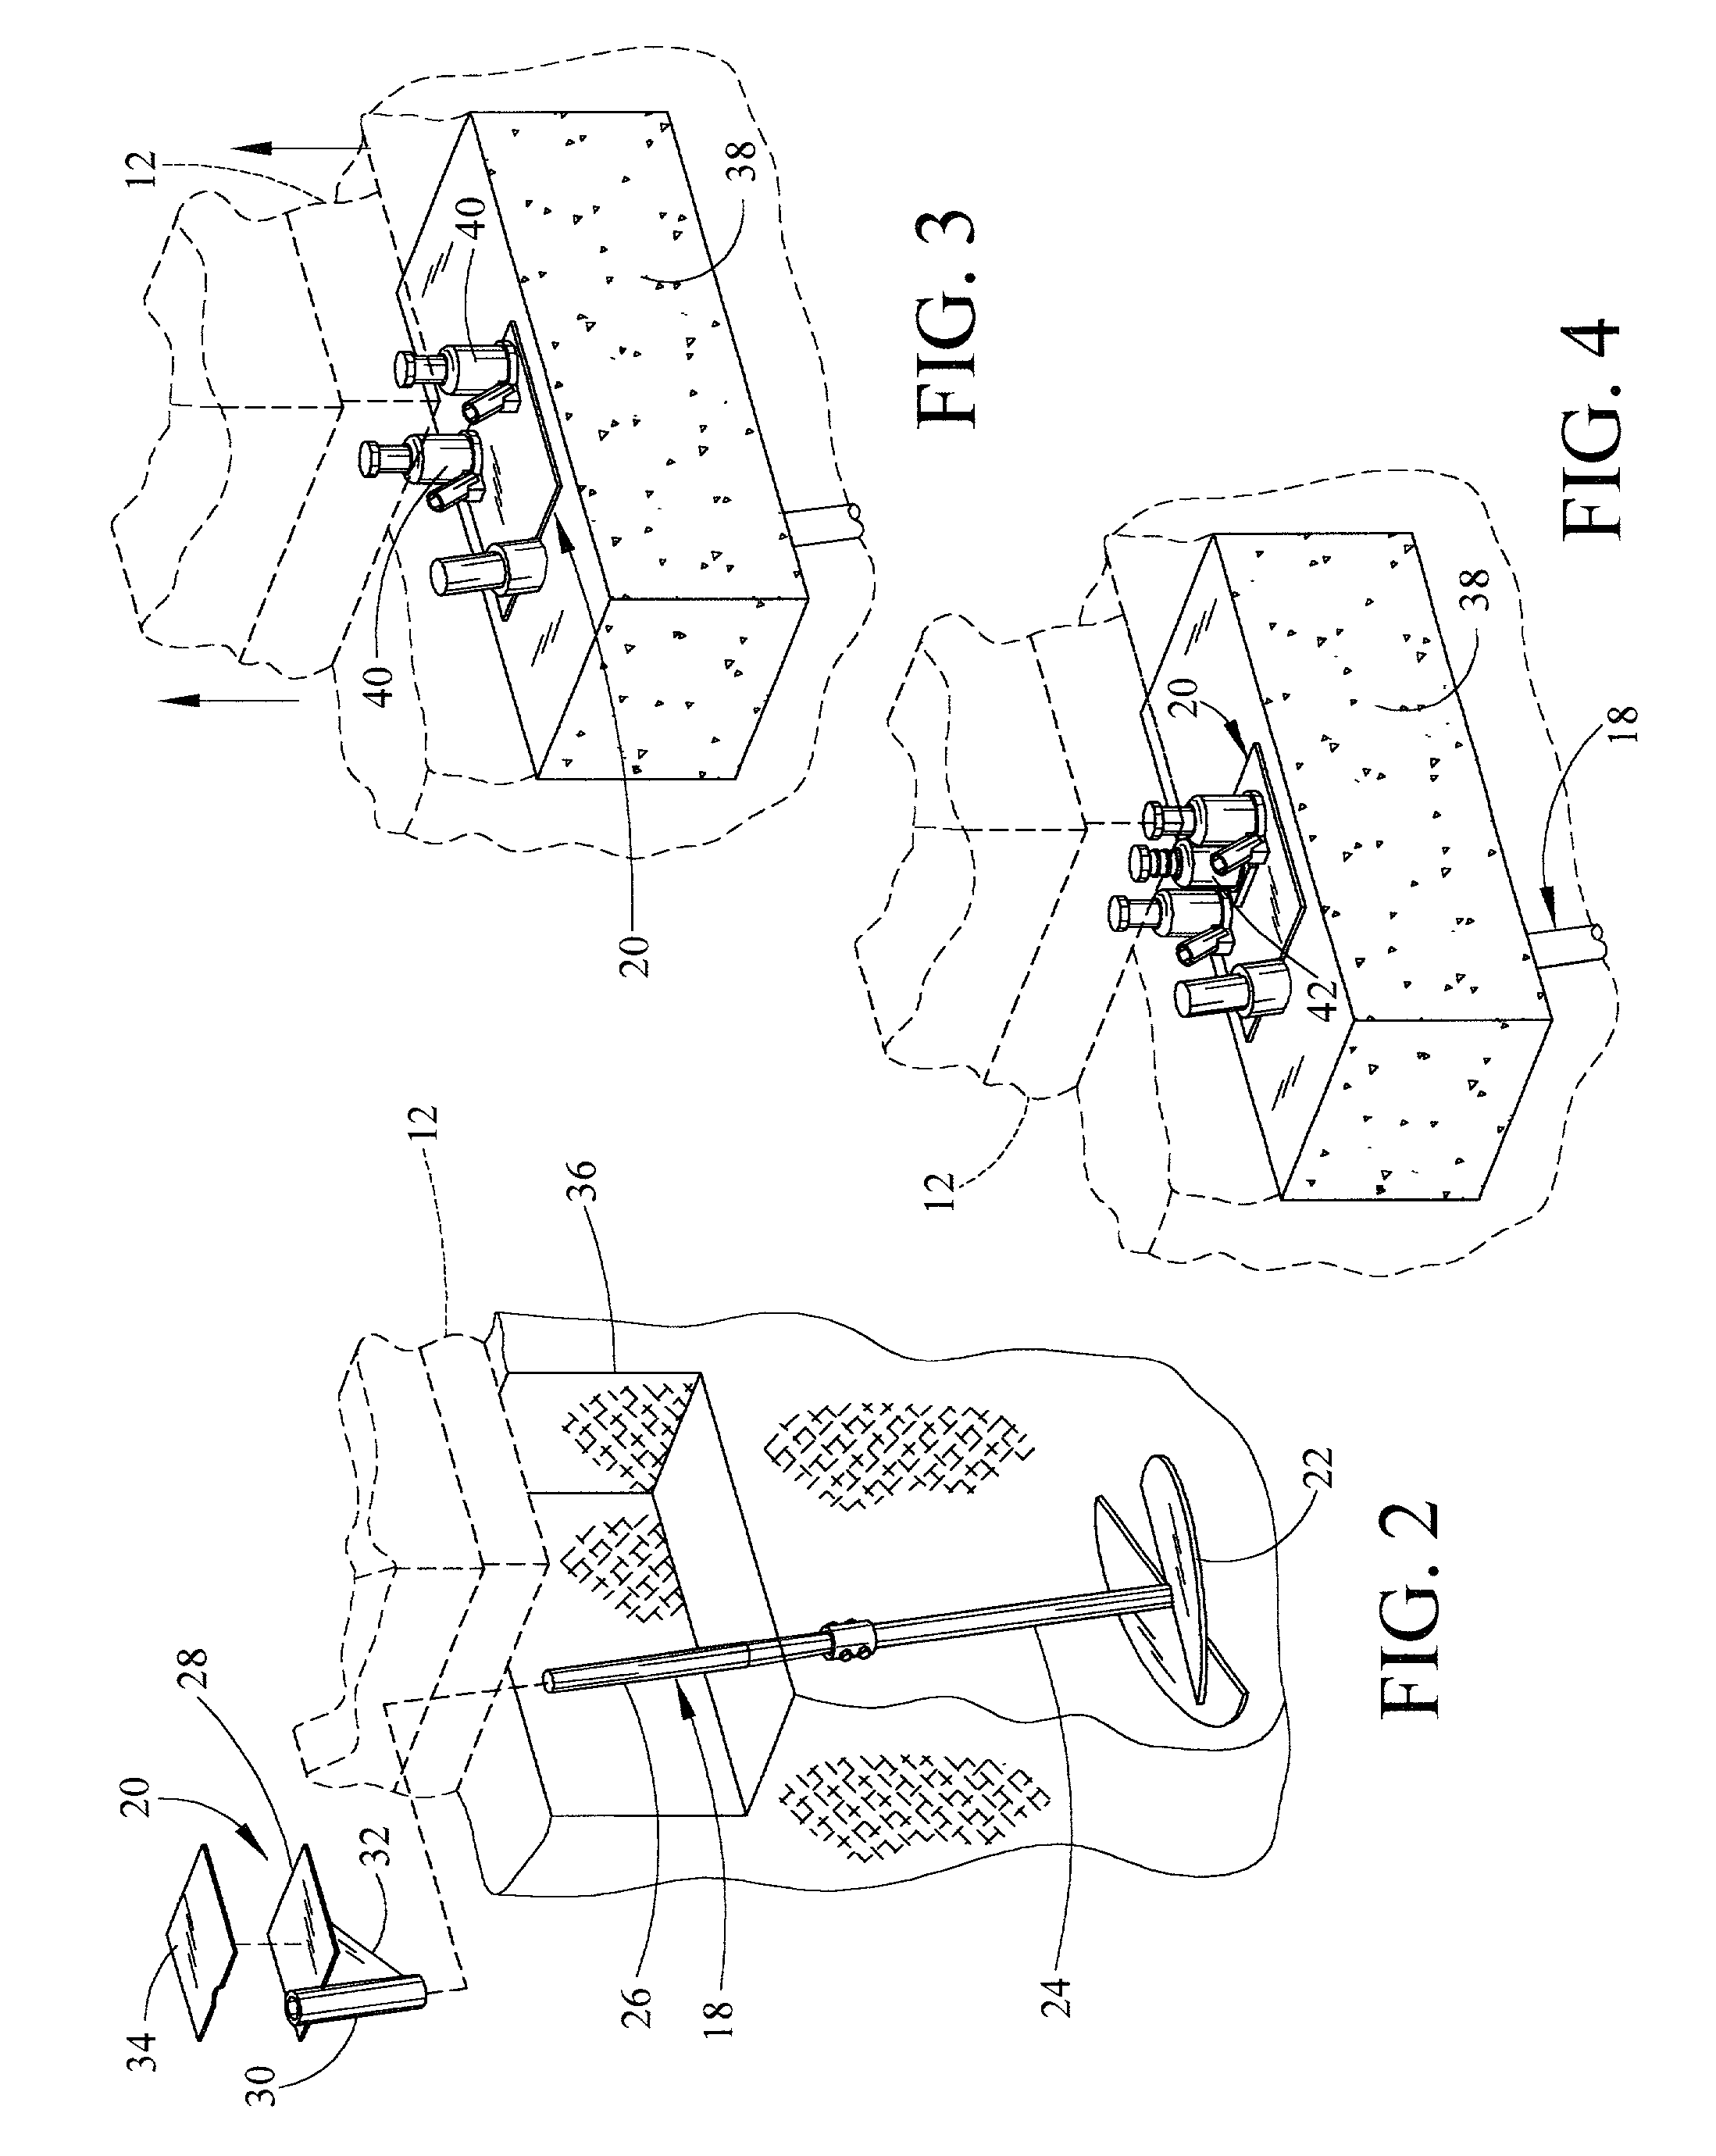 Method and apparatus for lifting, leveling, amd underpinning a building foundation